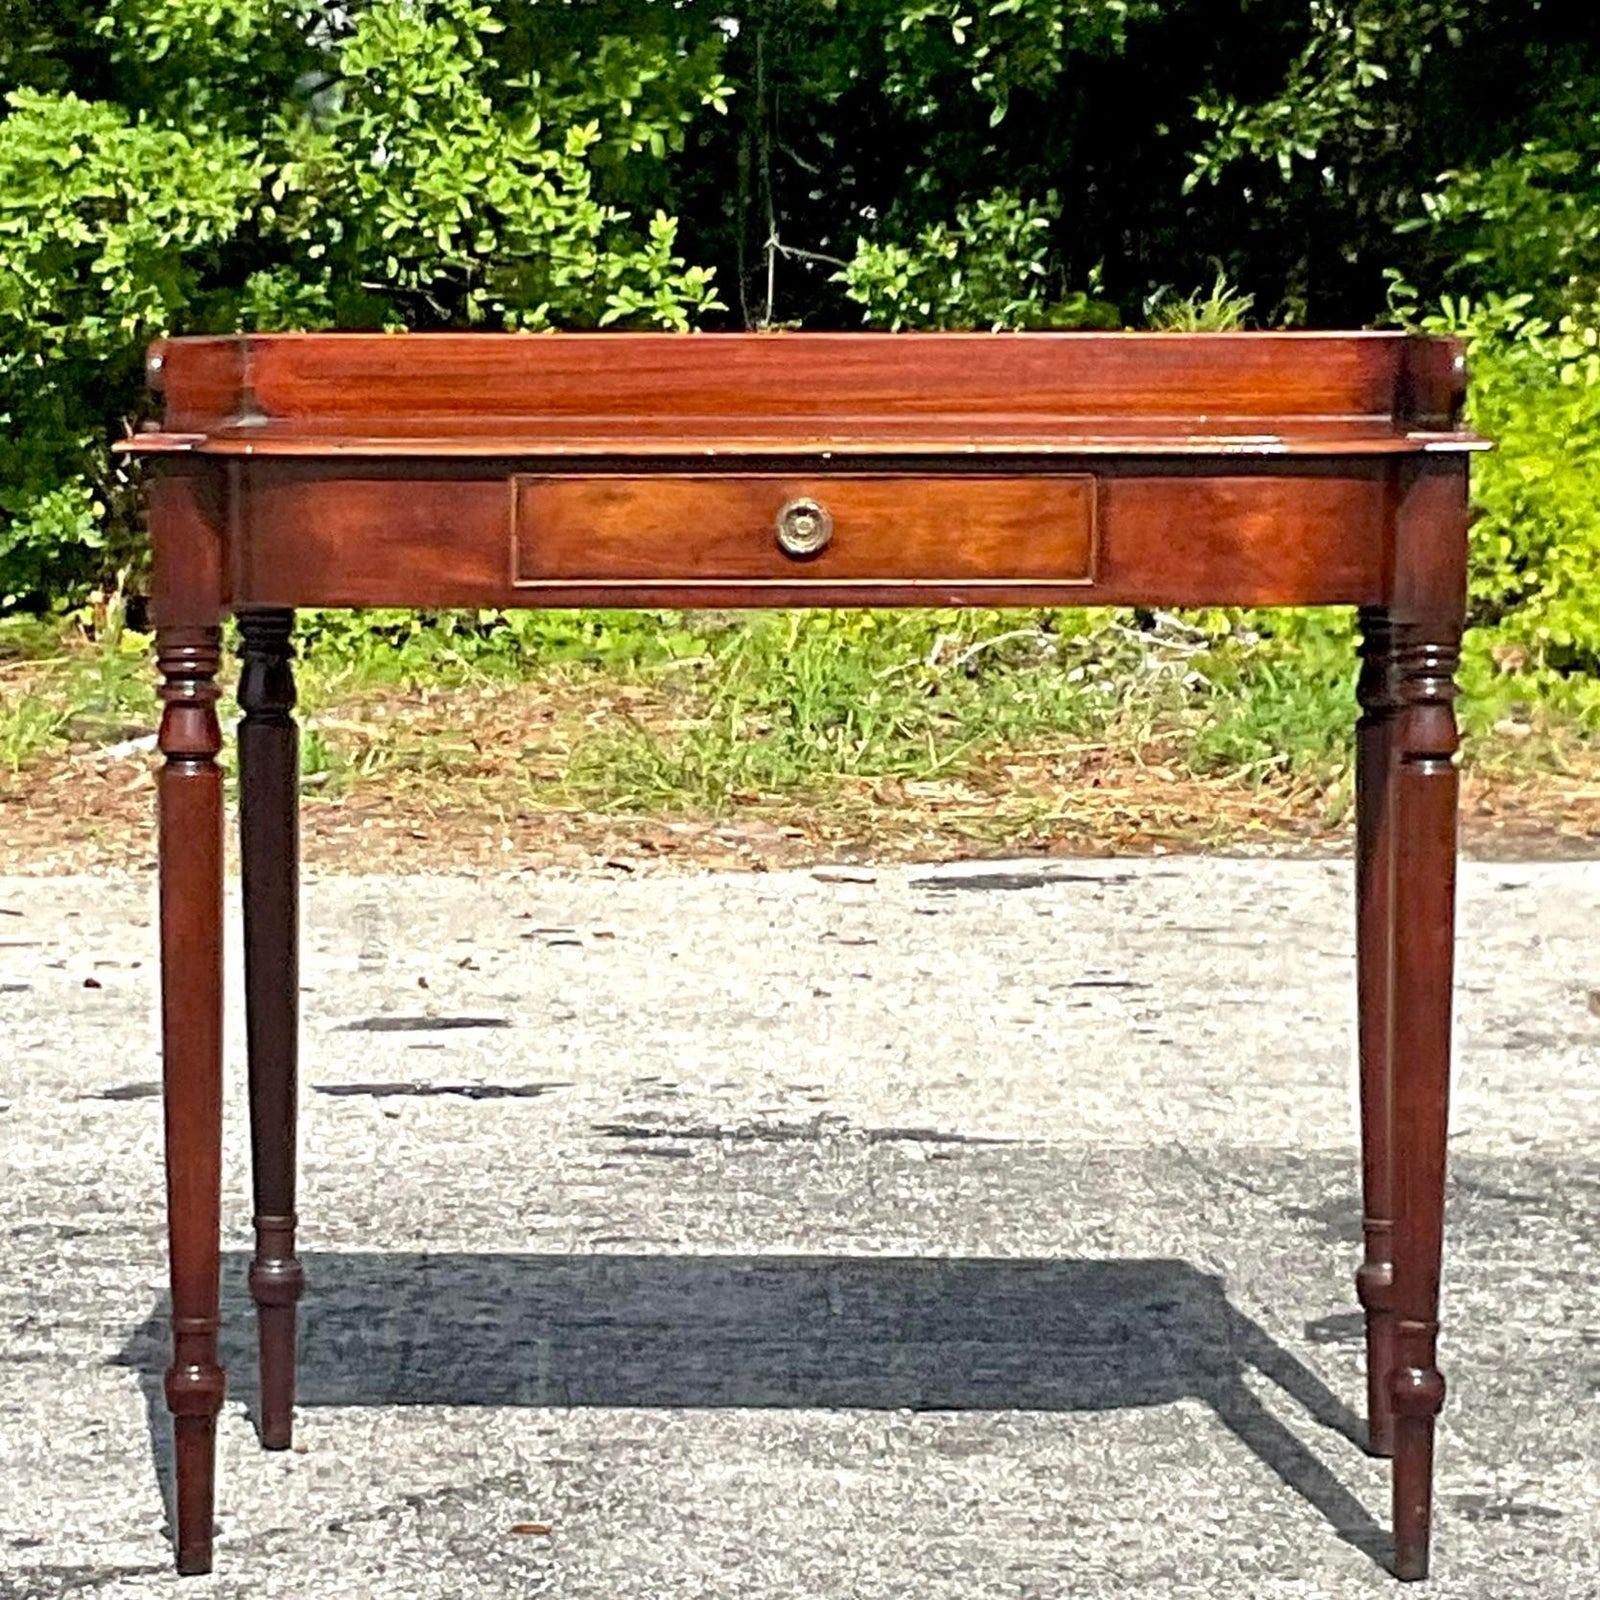 A fabulous vintage Regency writing desk. A beautiful English Mahogany style with long slender legs. Acquired from a Palm Beach estate.